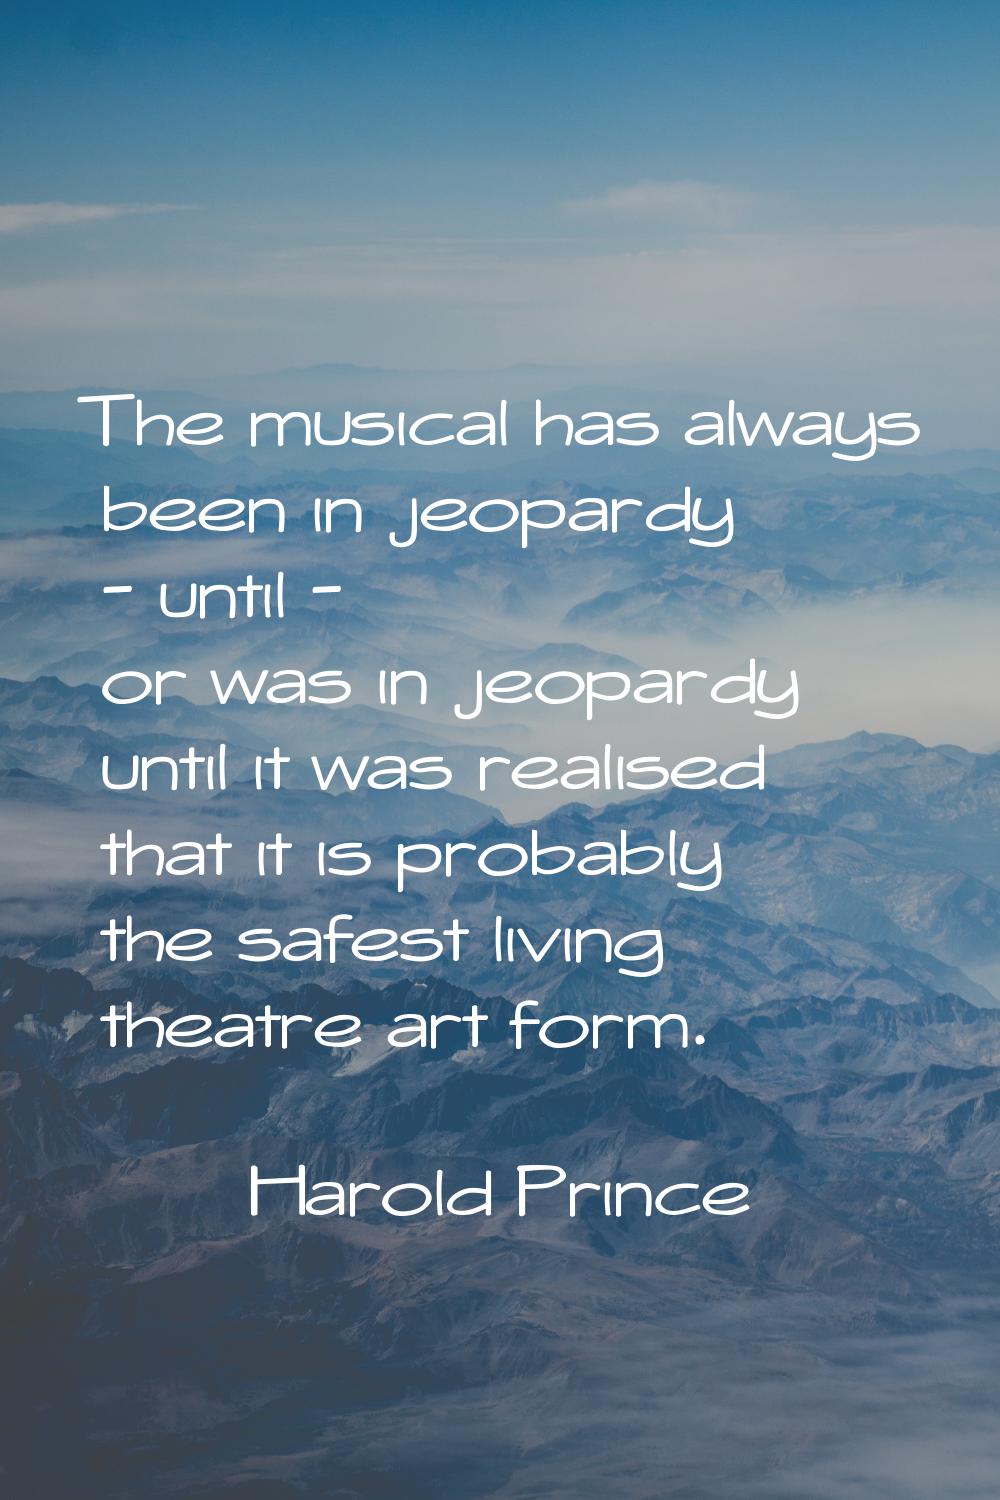 The musical has always been in jeopardy - until - or was in jeopardy until it was realised that it 